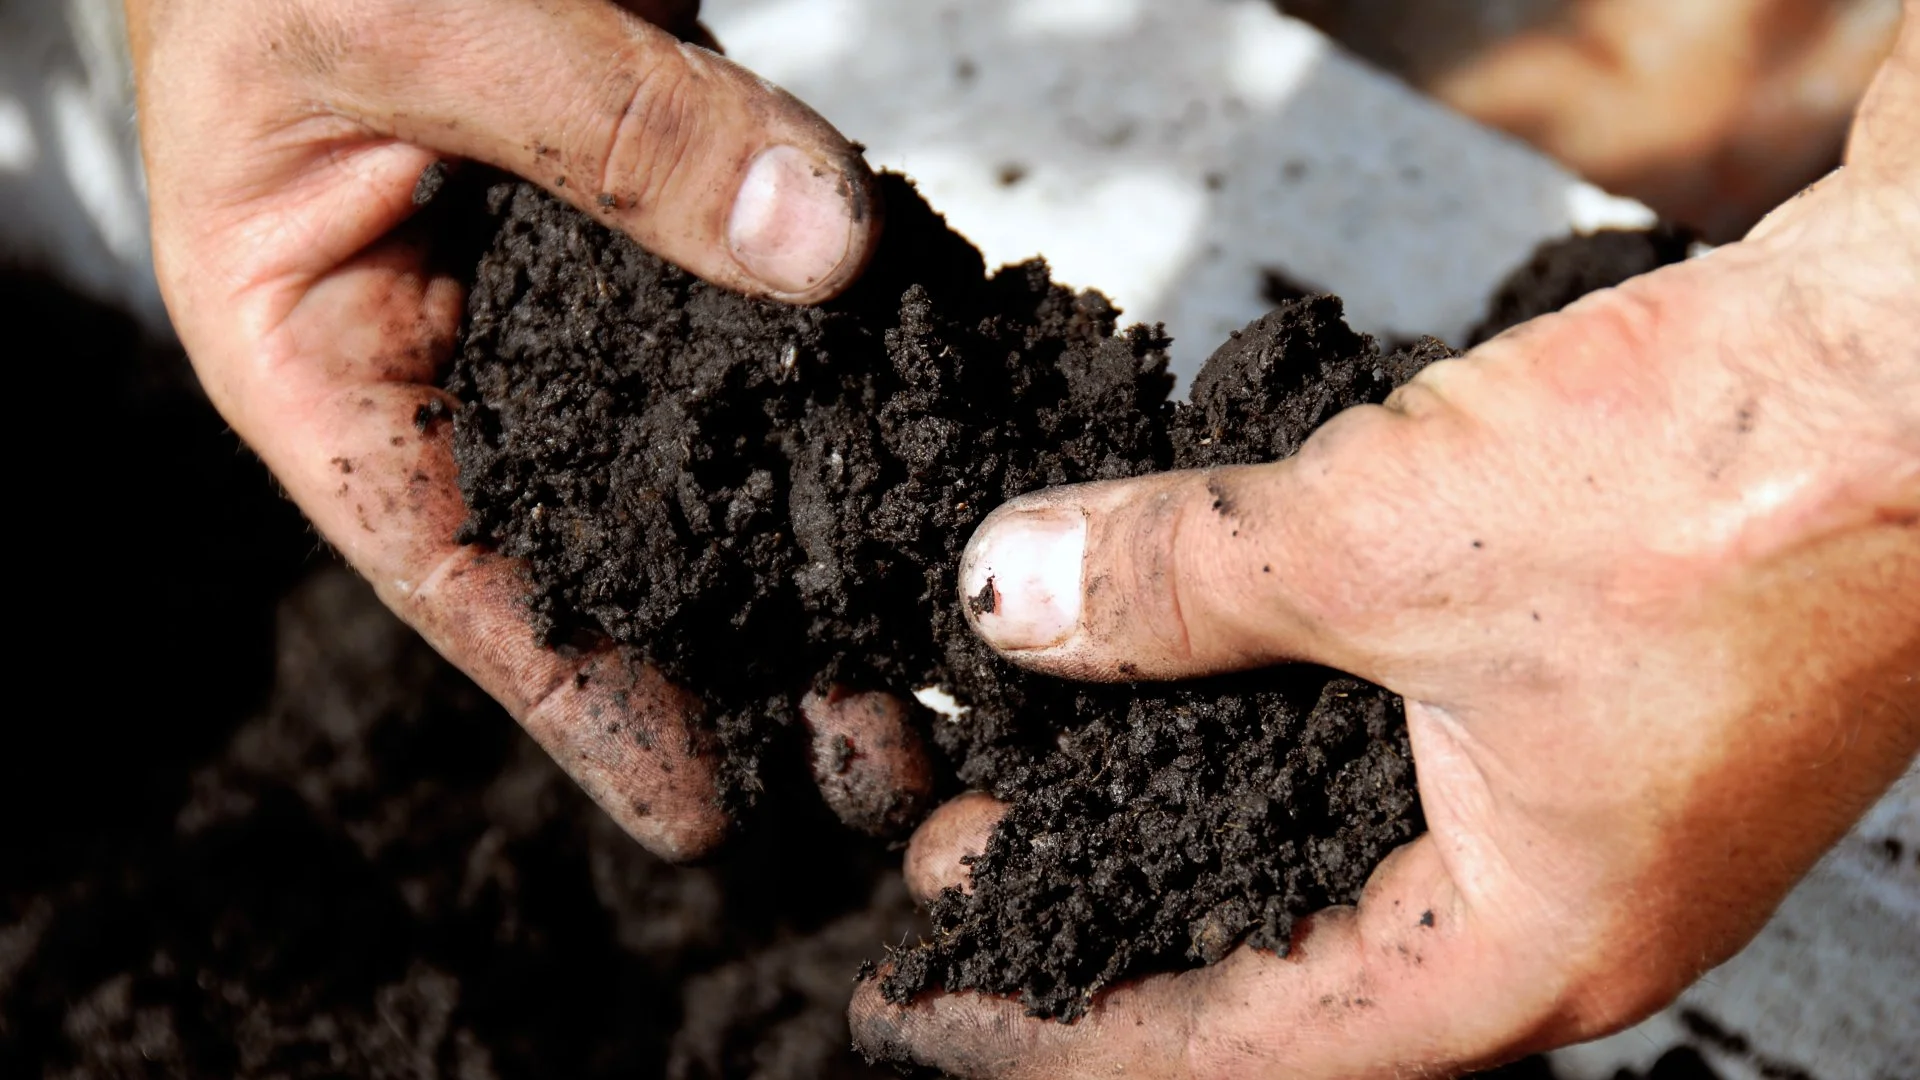 Achieving a Healthy Lawn Starts at Its Foundation - The Soil!